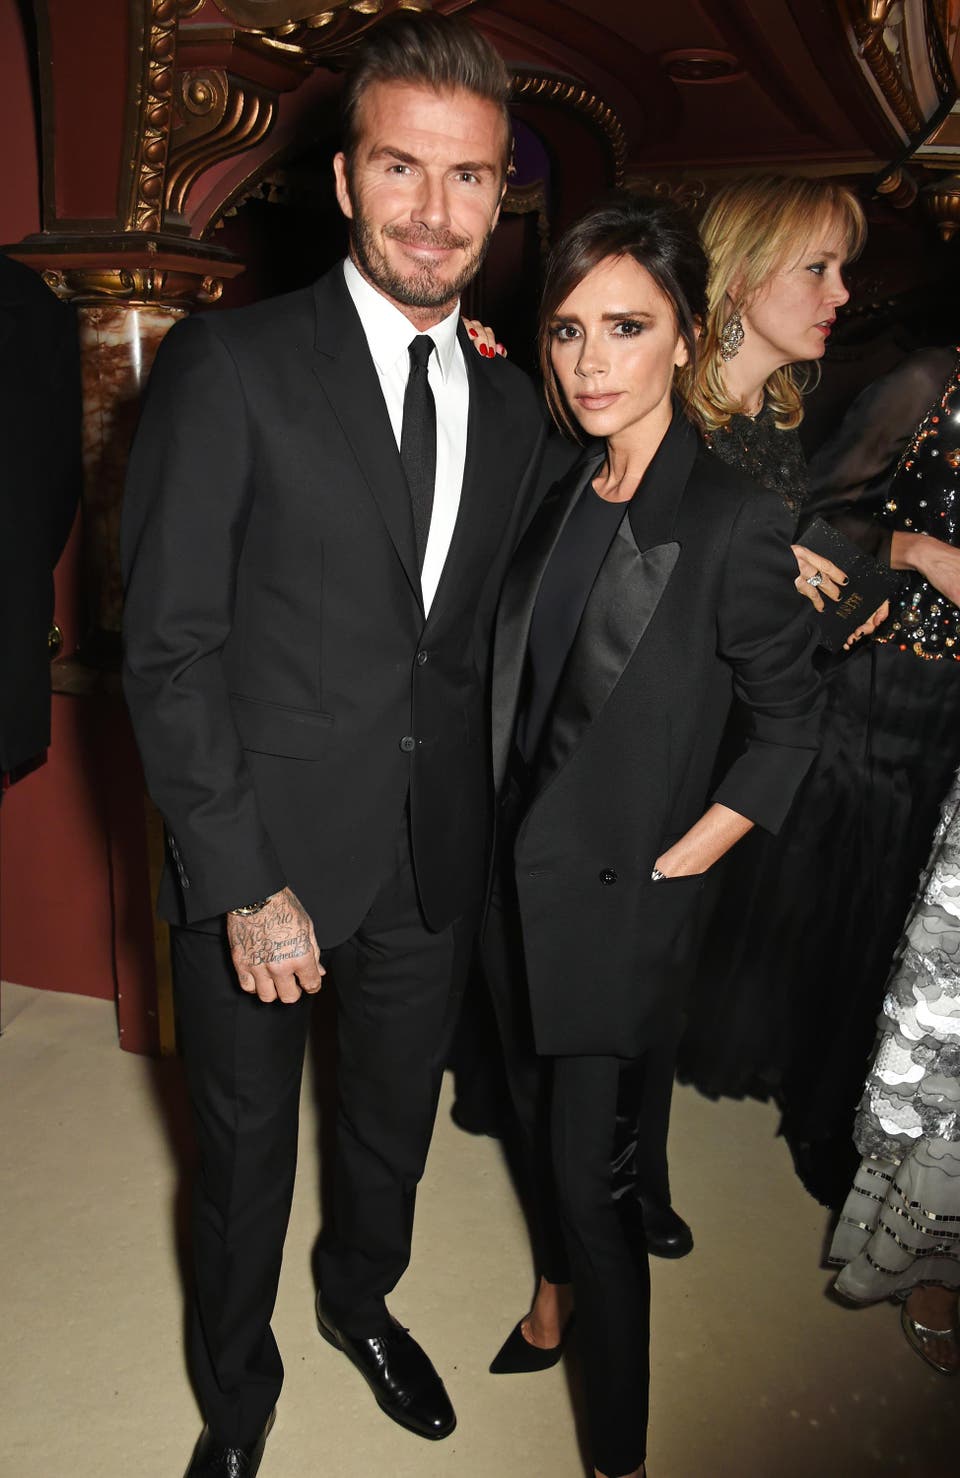 Attacks on David and Victoria Beckham fail for this simple reason